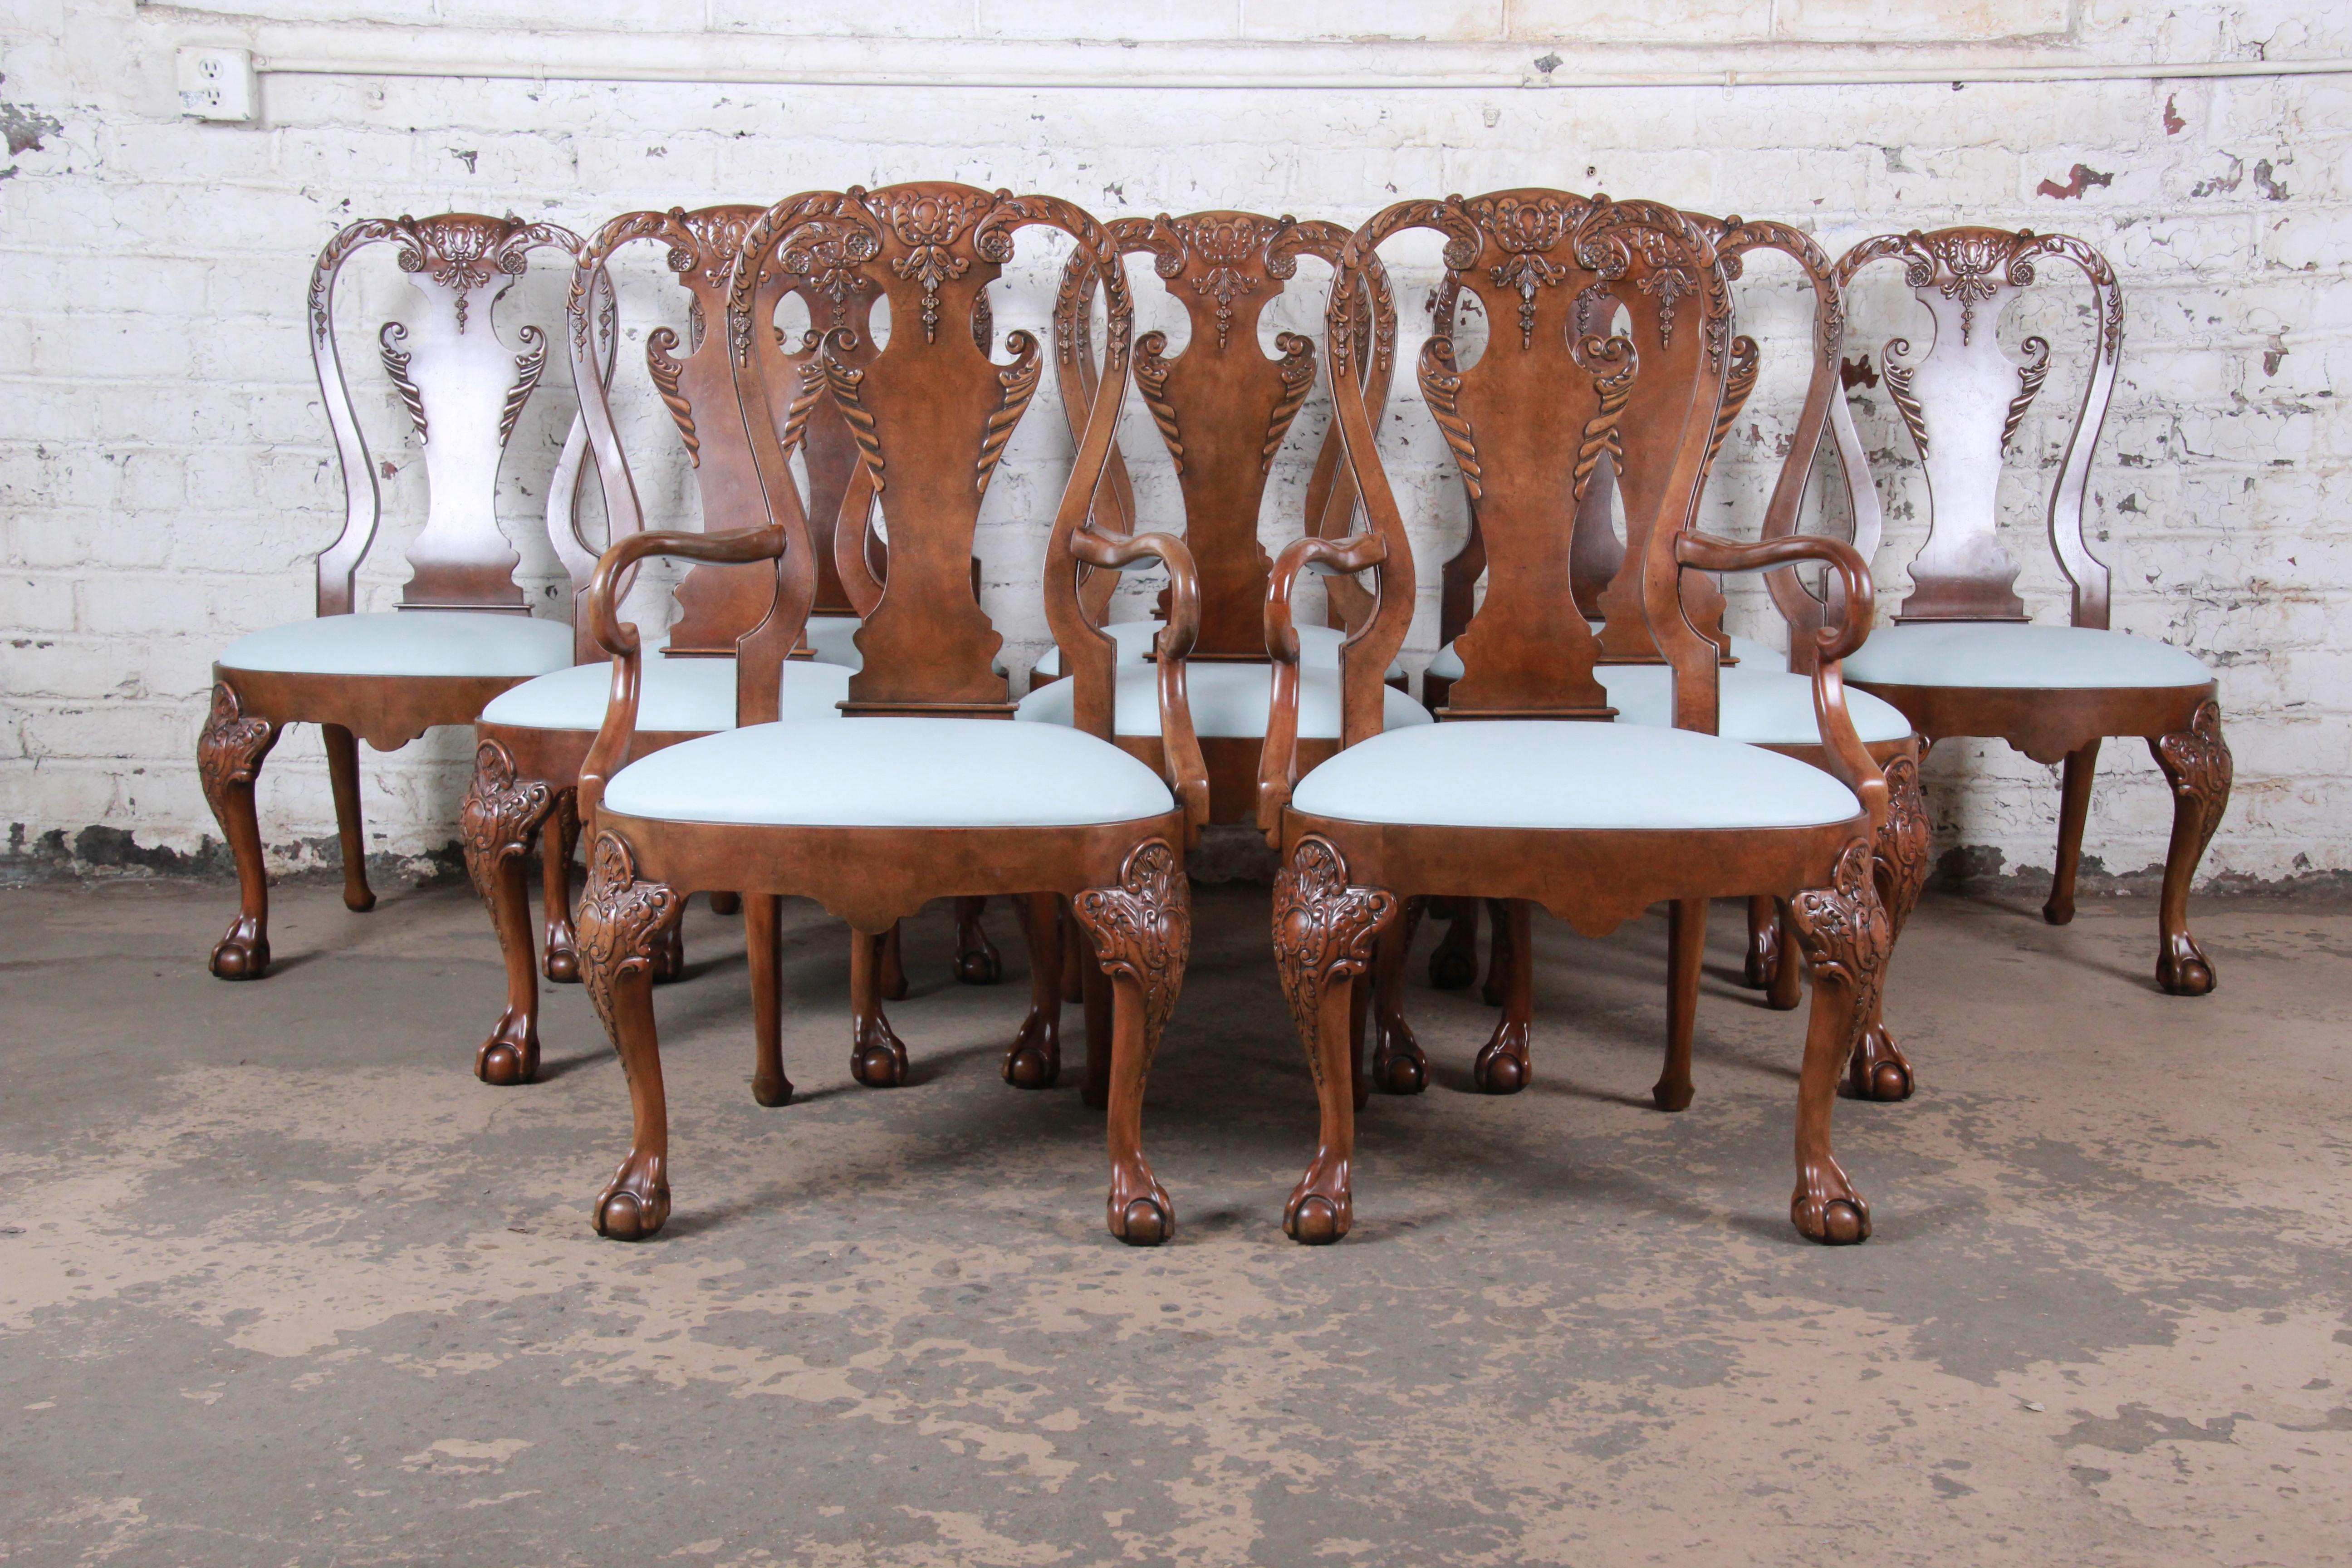 An exceptional set of ten Chippendale style ornate carved walnut dining chairs

By Baker Furniture 